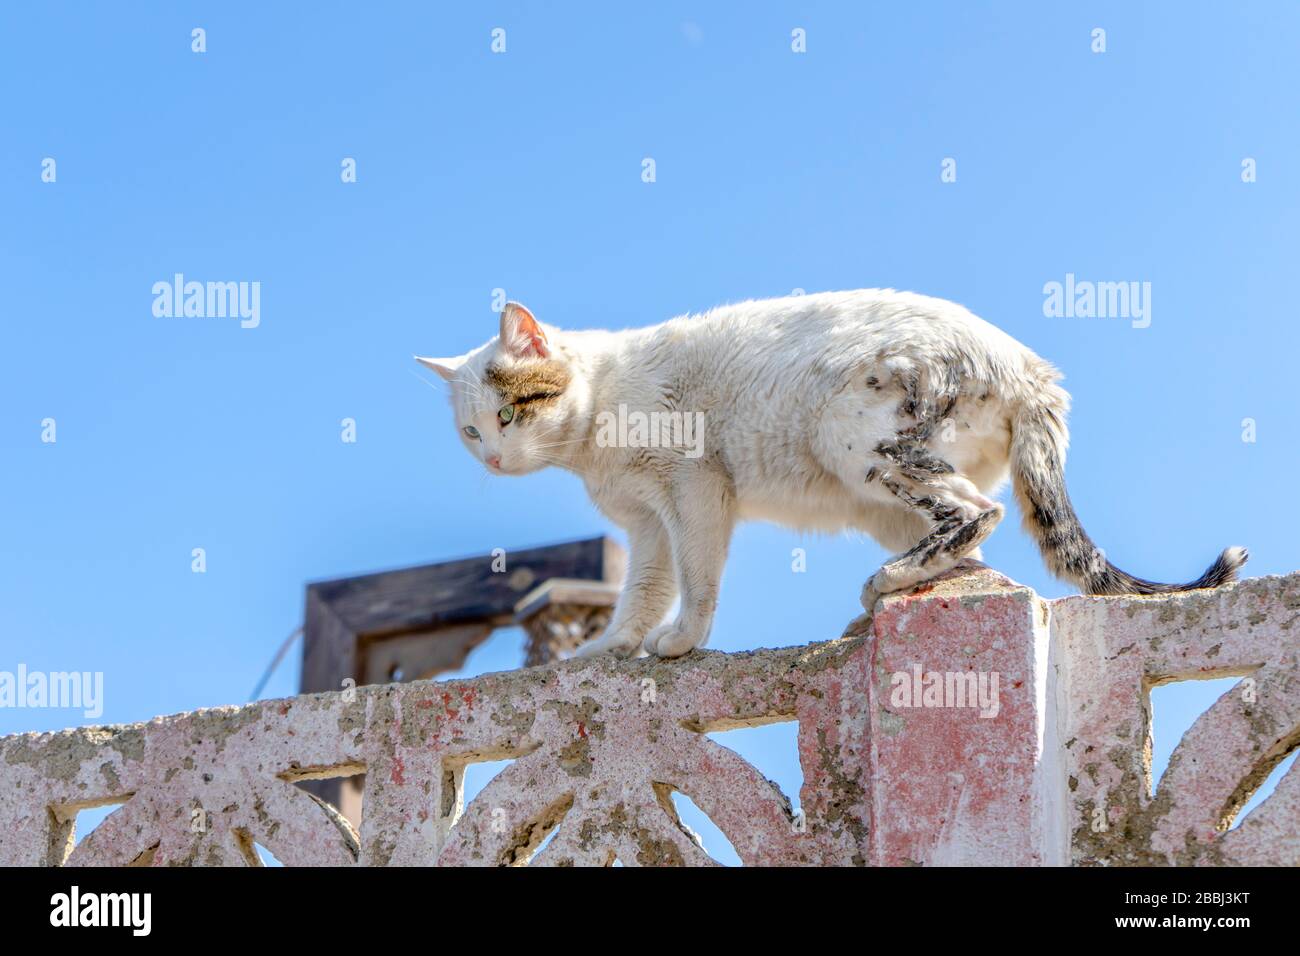 Injured white street cat is standing on a garden wall and watching street. It is not friendly animal. It is wild. Cute and beautiful cat. Stock Photo